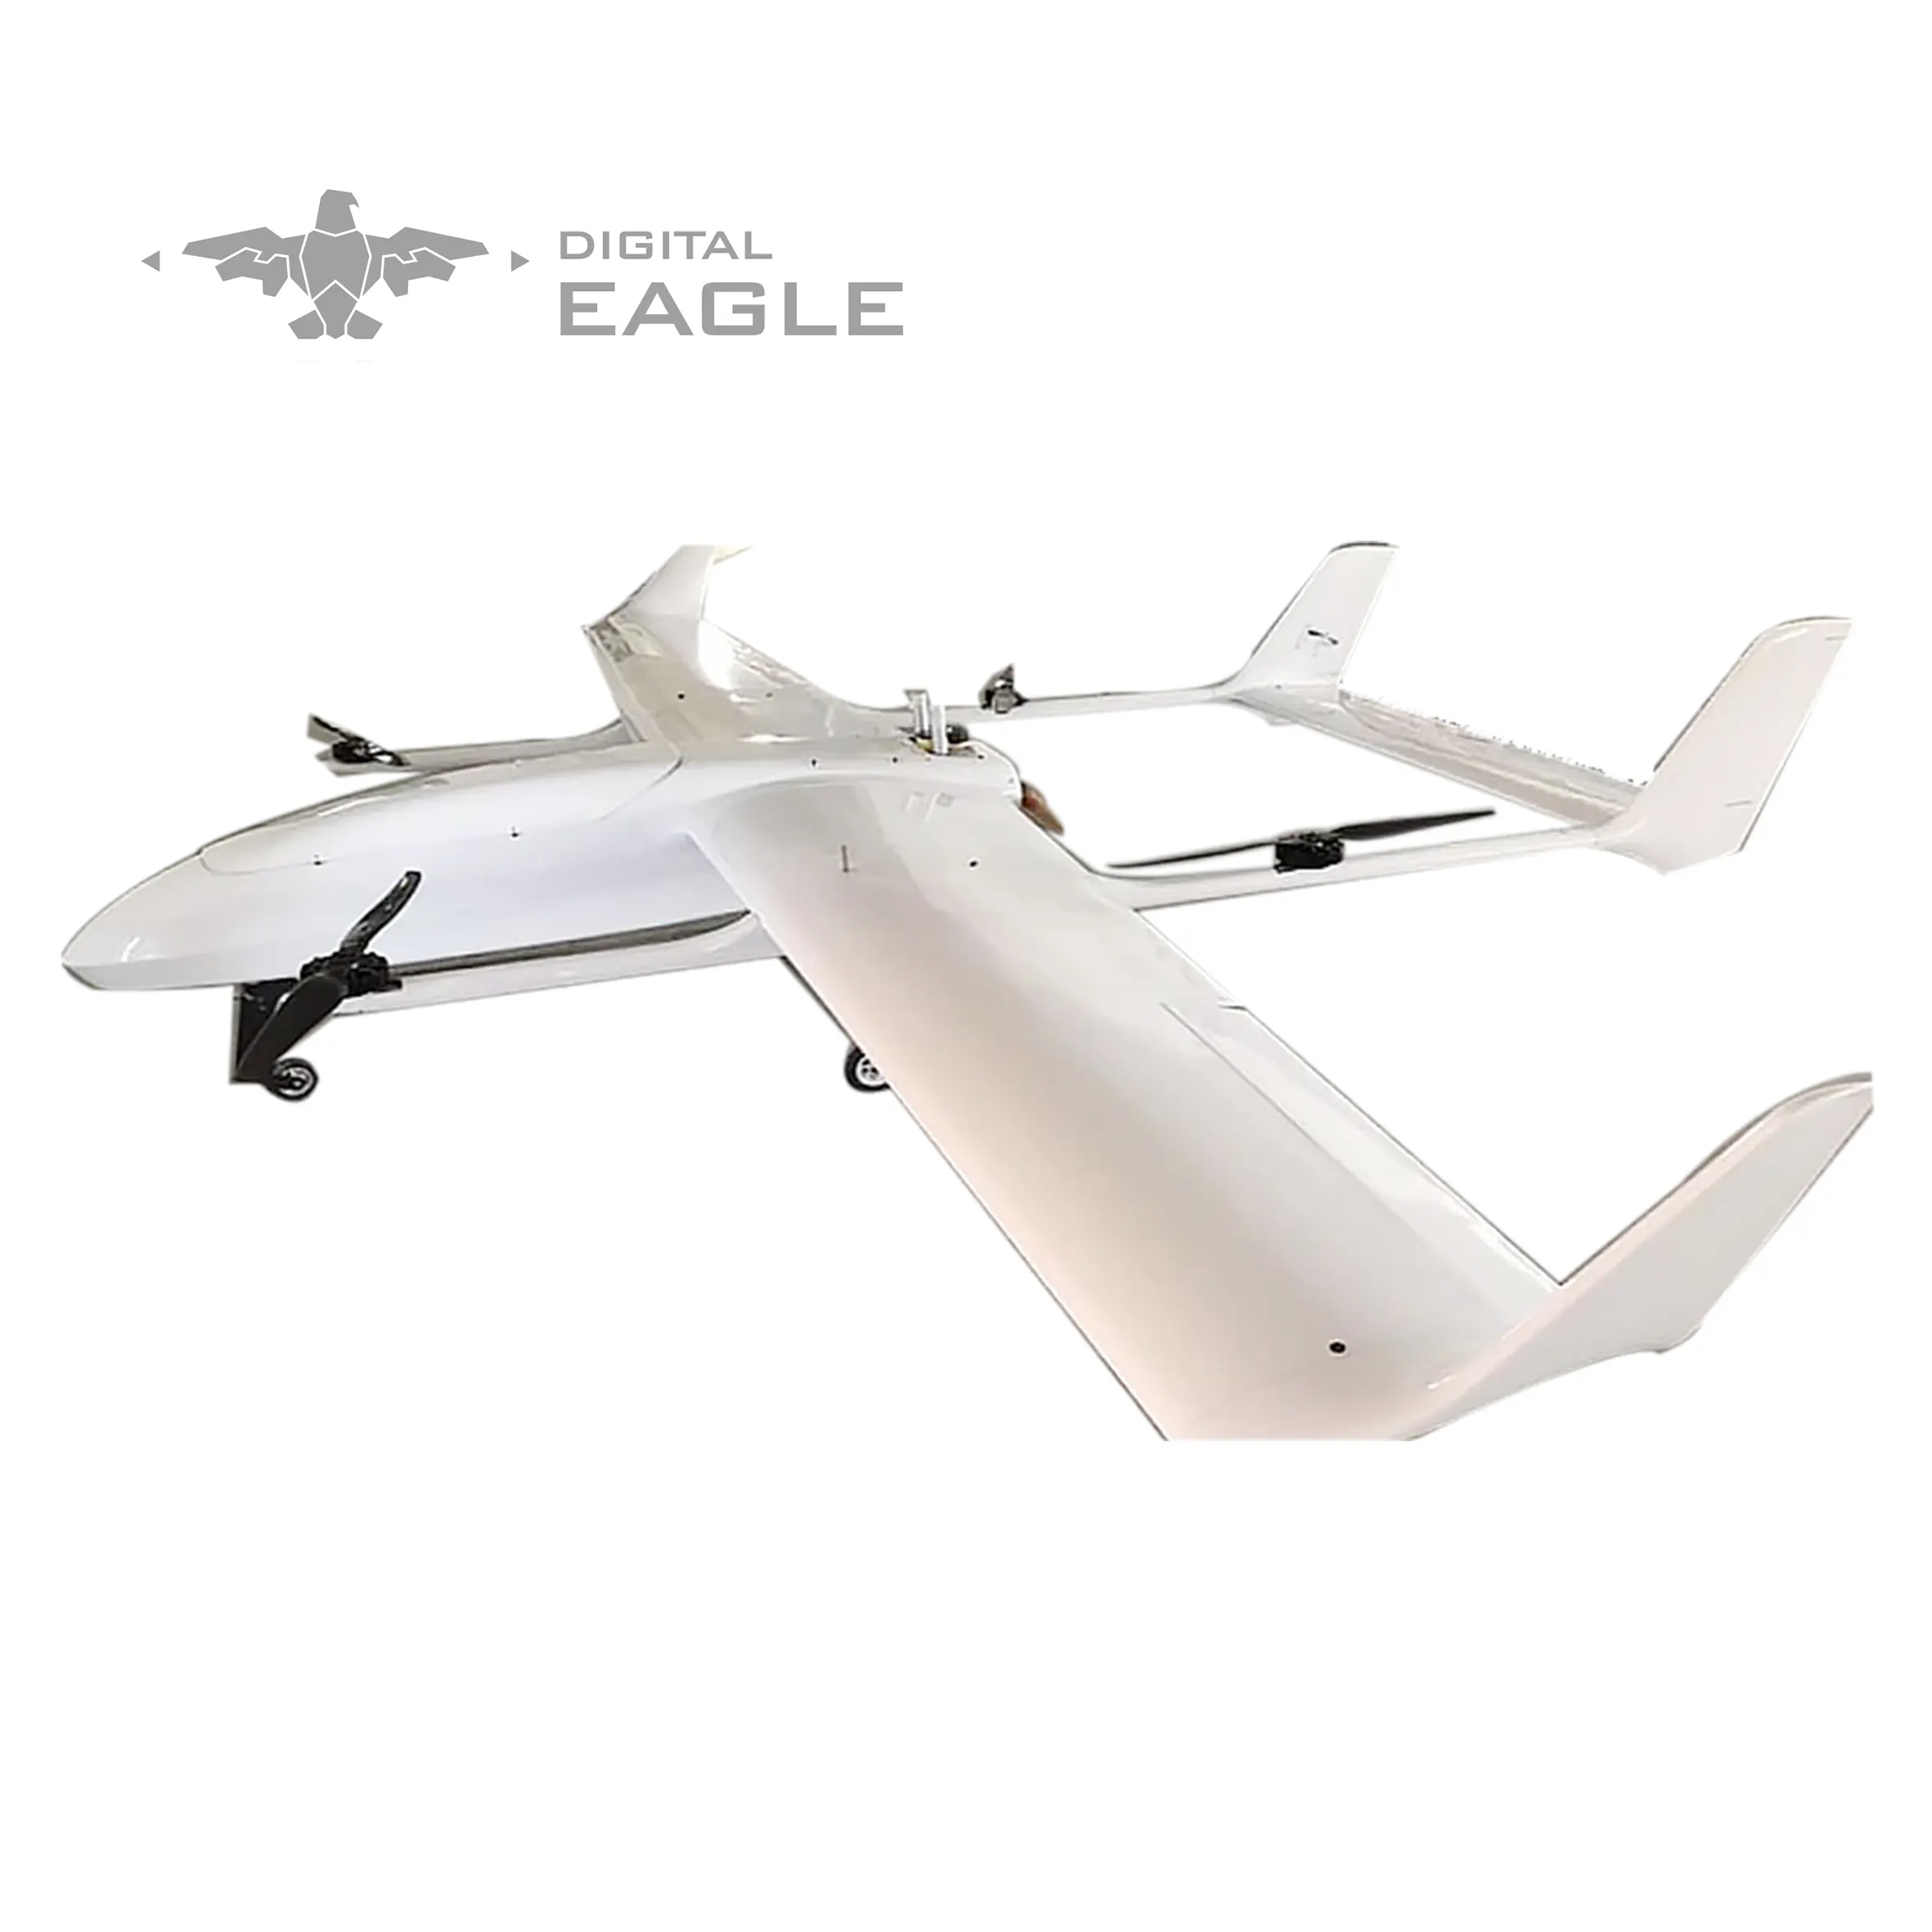 Digital Eagle YFT CZ45 Duration 8 Hours 20KG Payload Fixed Wing Delivery Drones VTOL Drone VTOL Helicopter Payload Aircraft